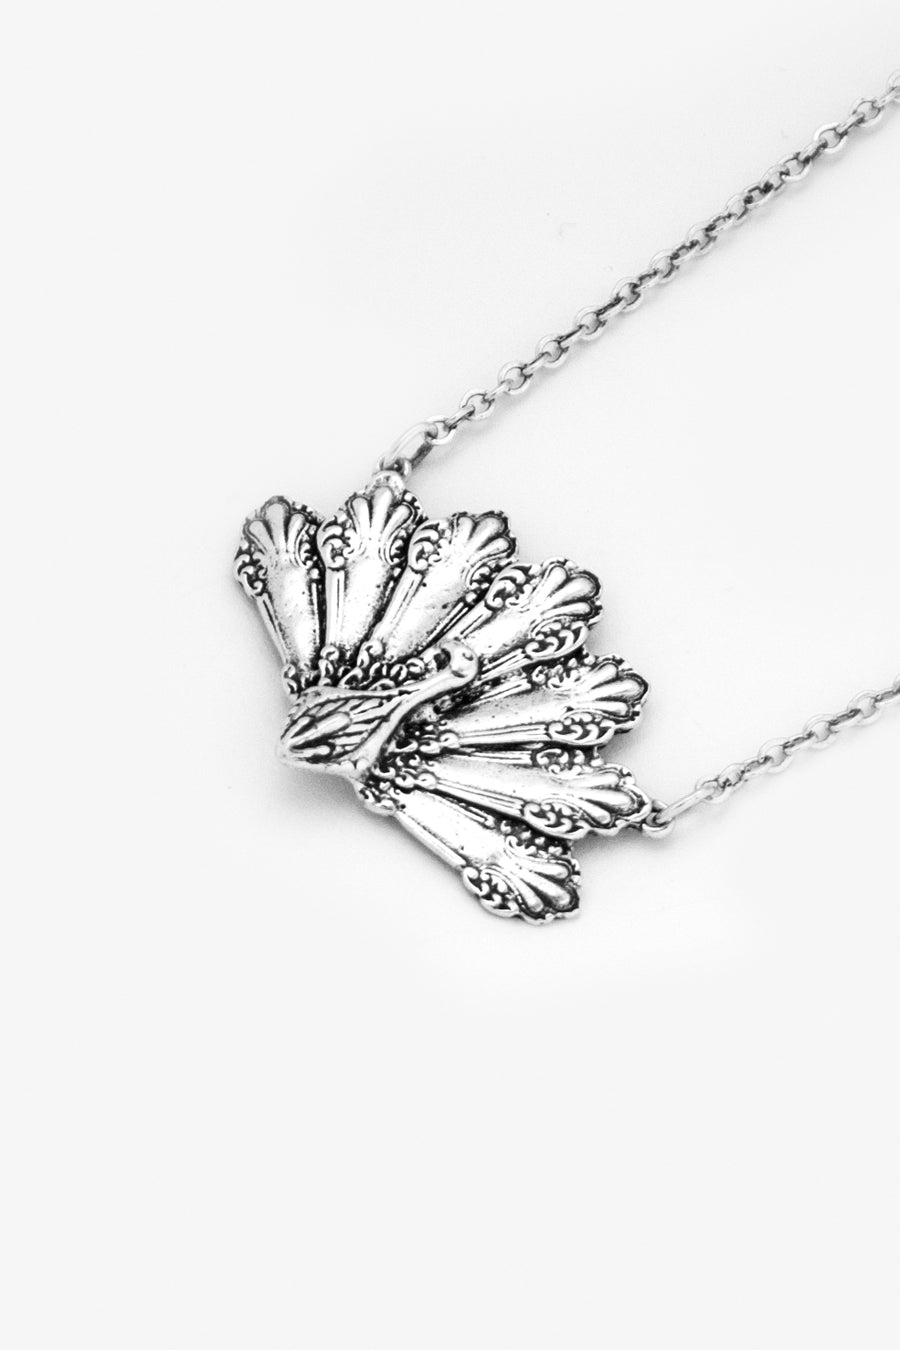 Peacock Sterling  Silver Necklace - Silver Spoon Jewelry